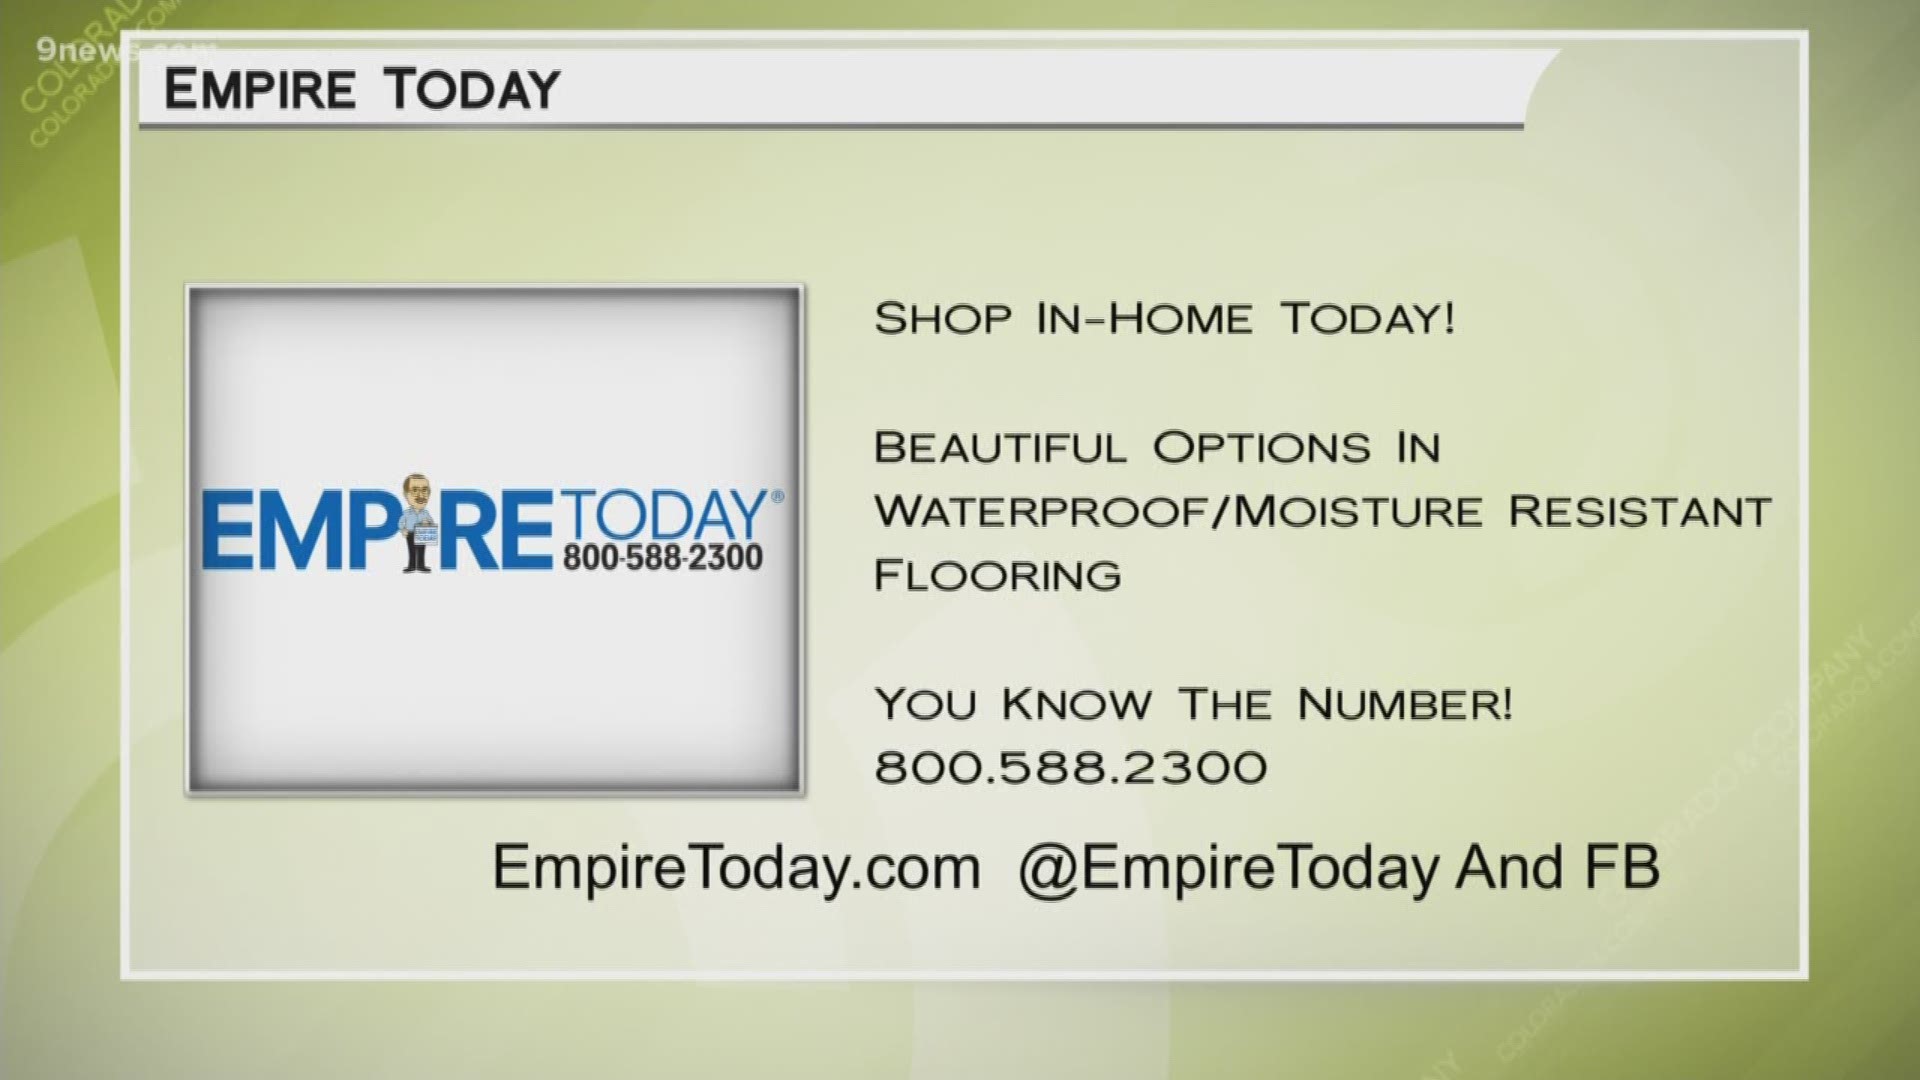 Empire Today makes getting beautiful floors easy. Call 800.588.2300 or check out www.EmpireToday.com to make your in-home shopping appointment now.